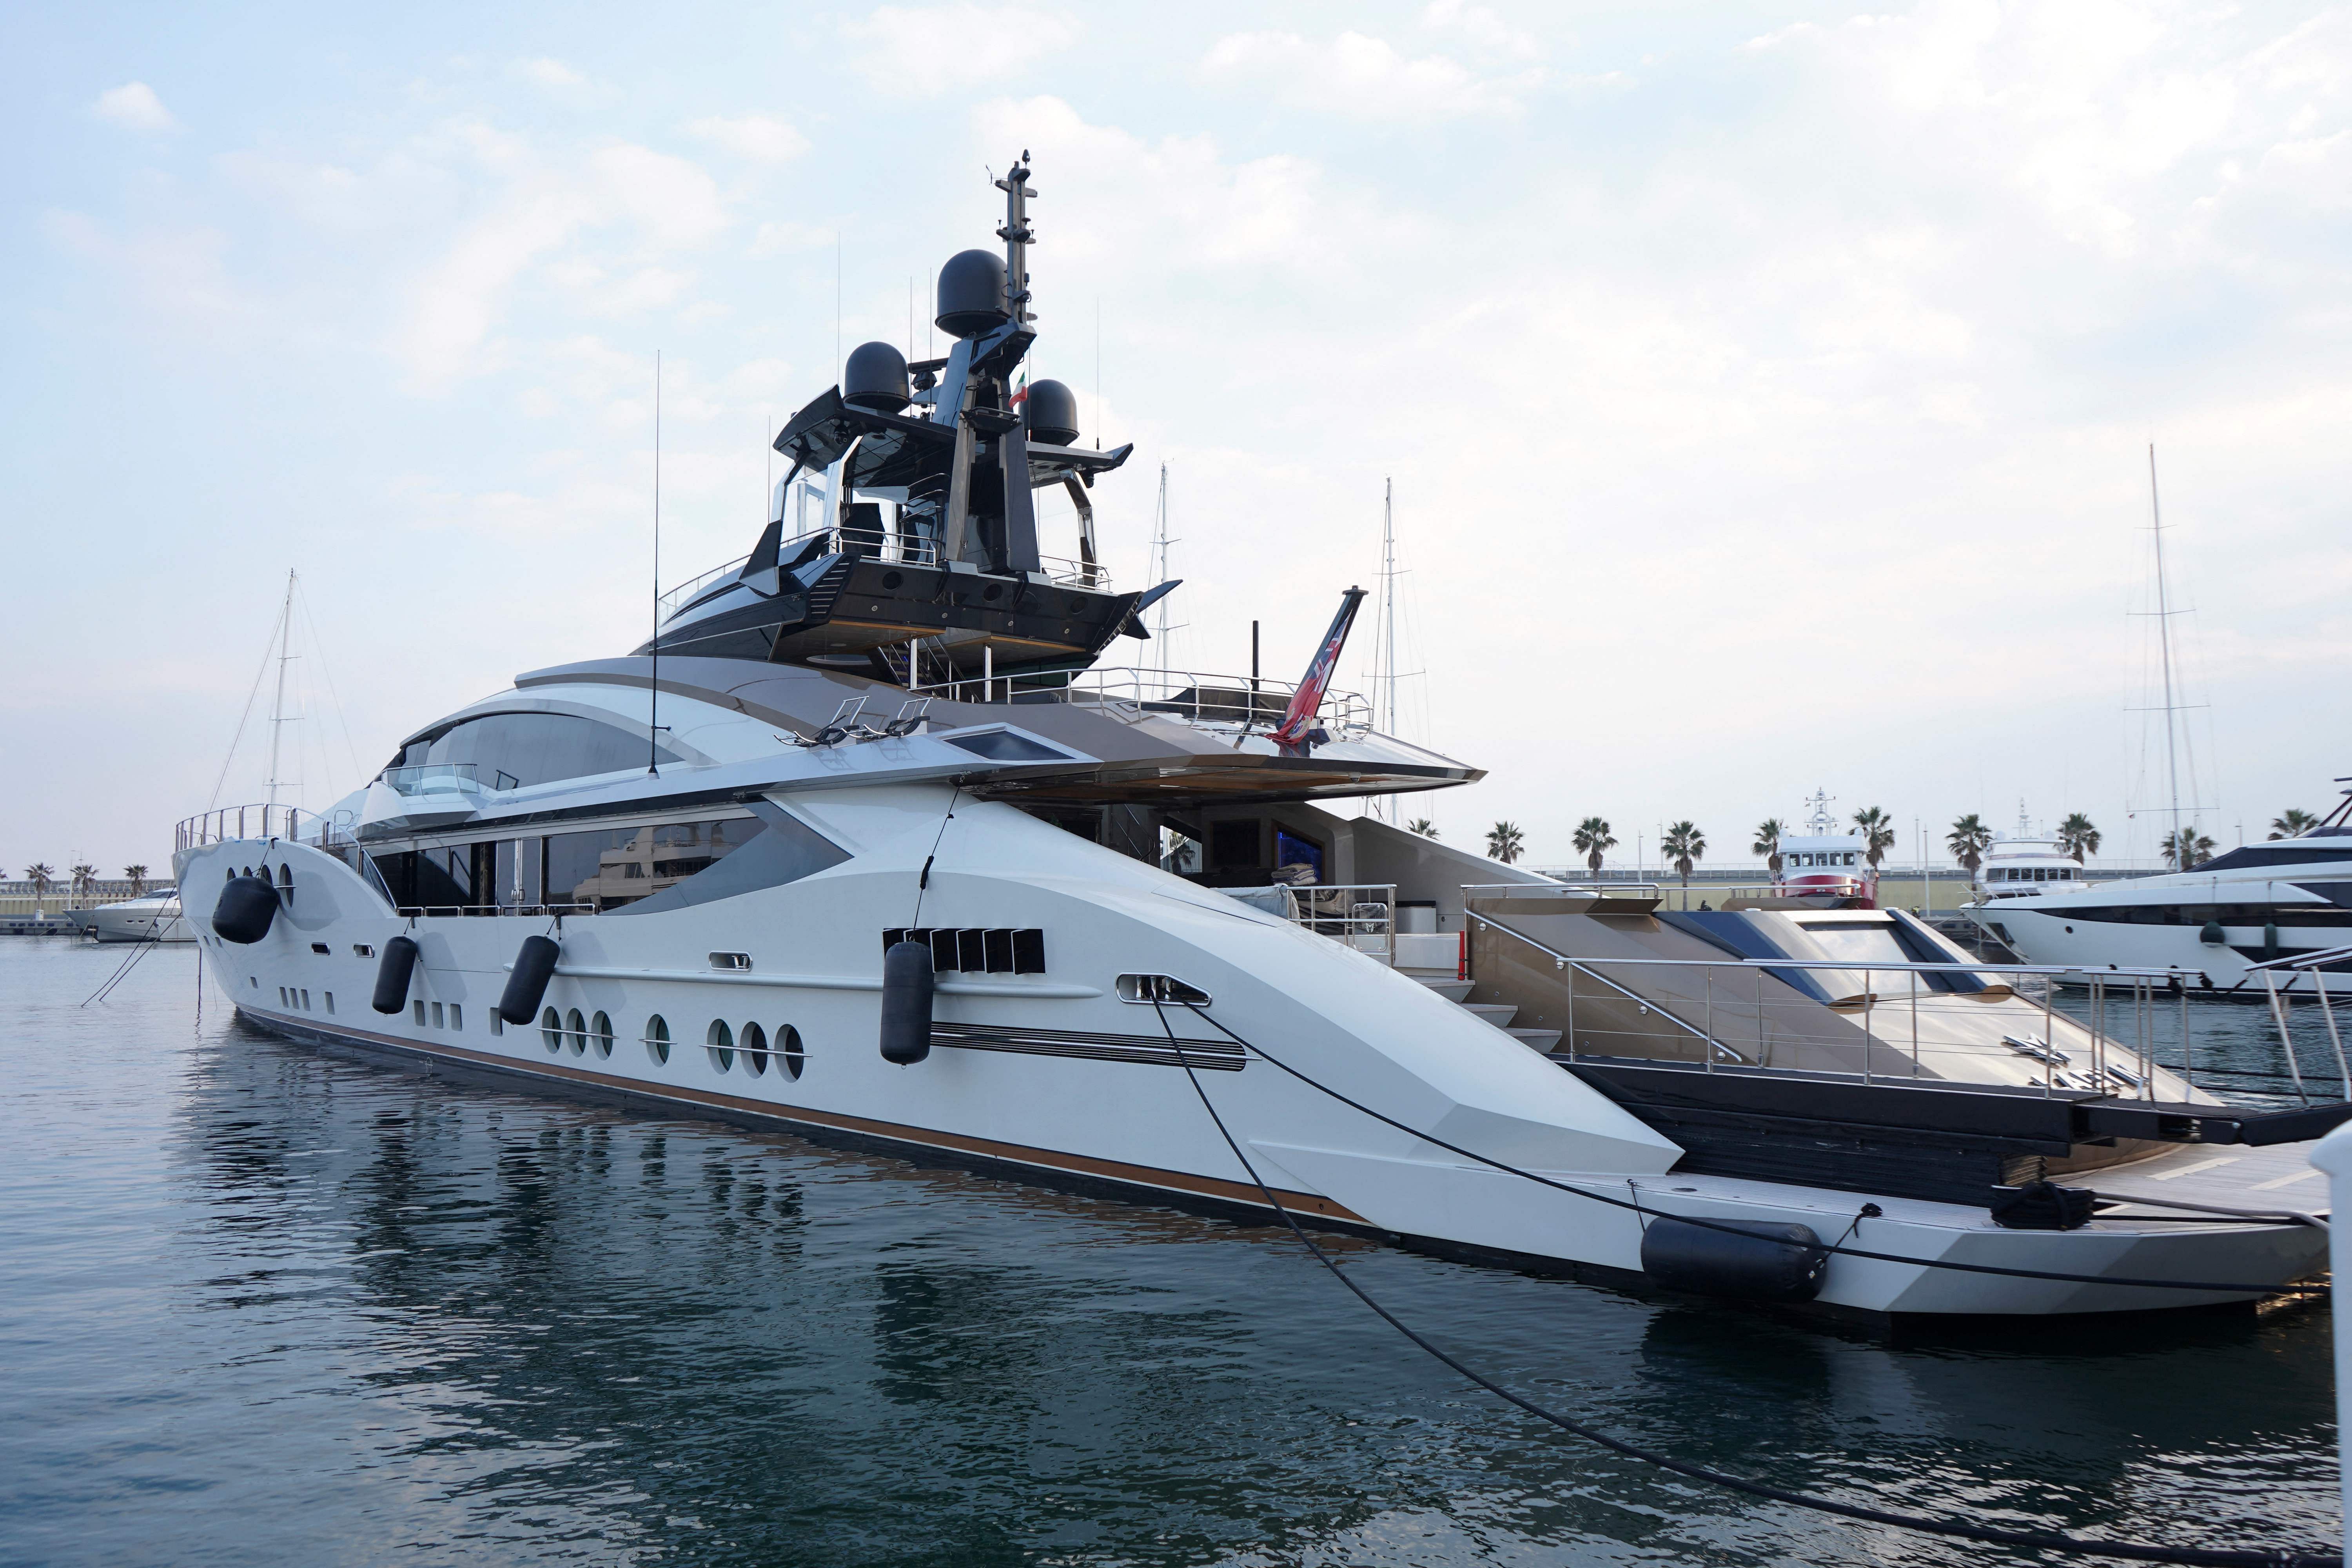 russian oligarch yacht italy